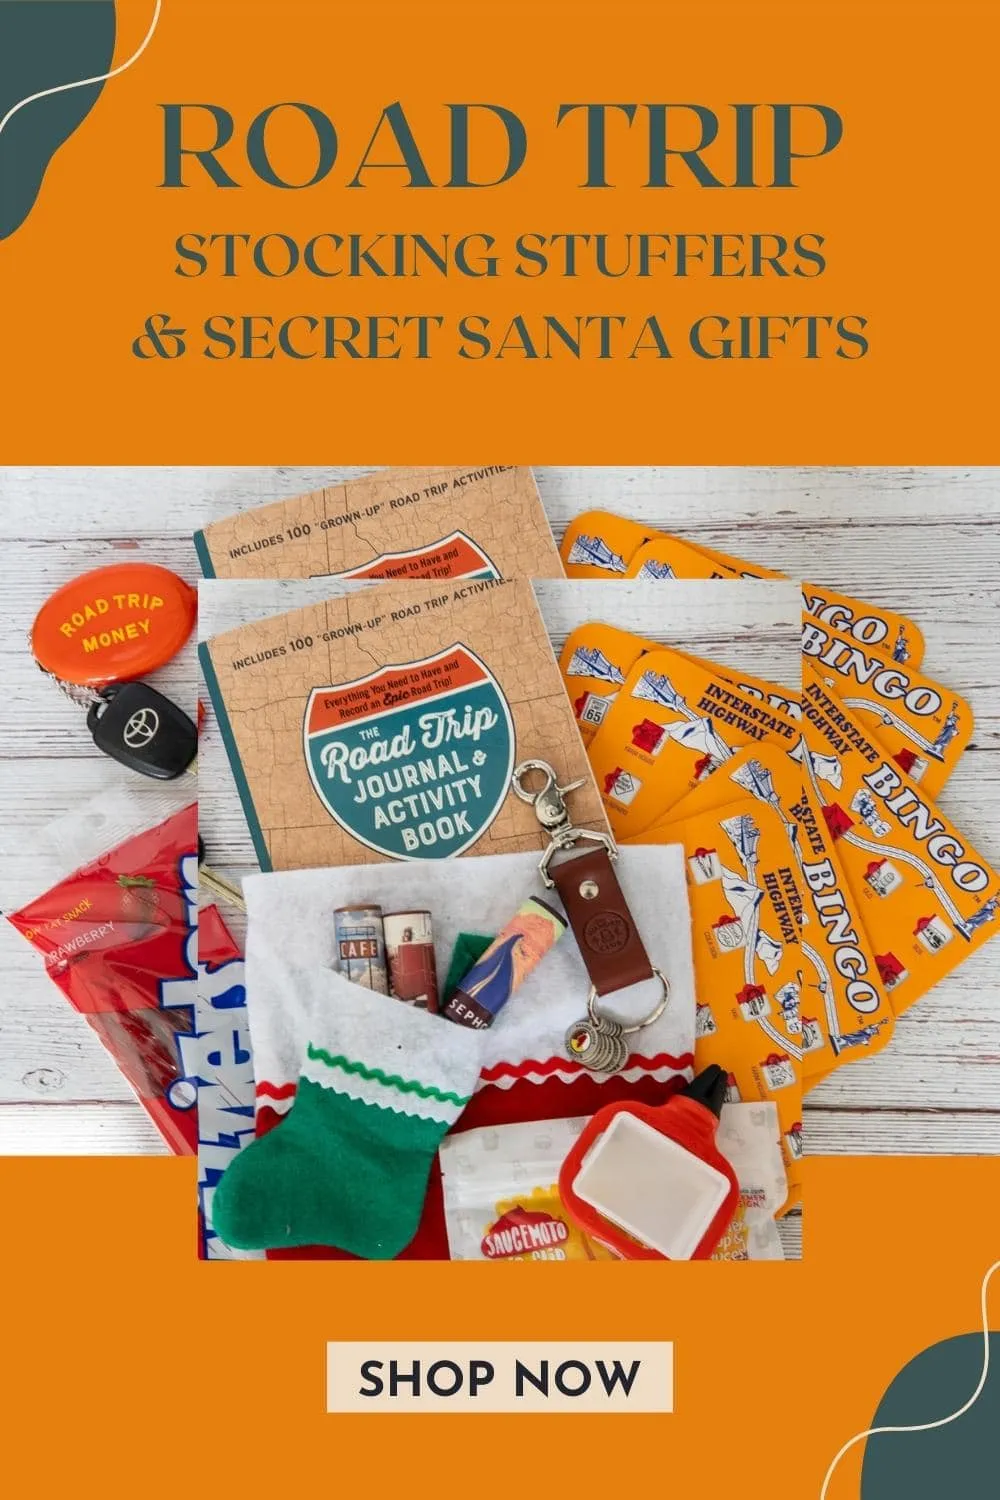 Every year Santa Claus takes the ultimate road trip, traveling all across the globe to cities big and small, spreading cheer in his magical sleigh. If you want to capture some of that magic for yourself by presenting the perfect small gift to a road tripper in your life, this list of twelve perfect Road Trip Stocking Stuffers and Secret Santa gifts is your guide to small things that will give a big smile to the travel lovers who receive them. #RoadTrip #RoadTripGifts #GiftGuide #TravelGifts